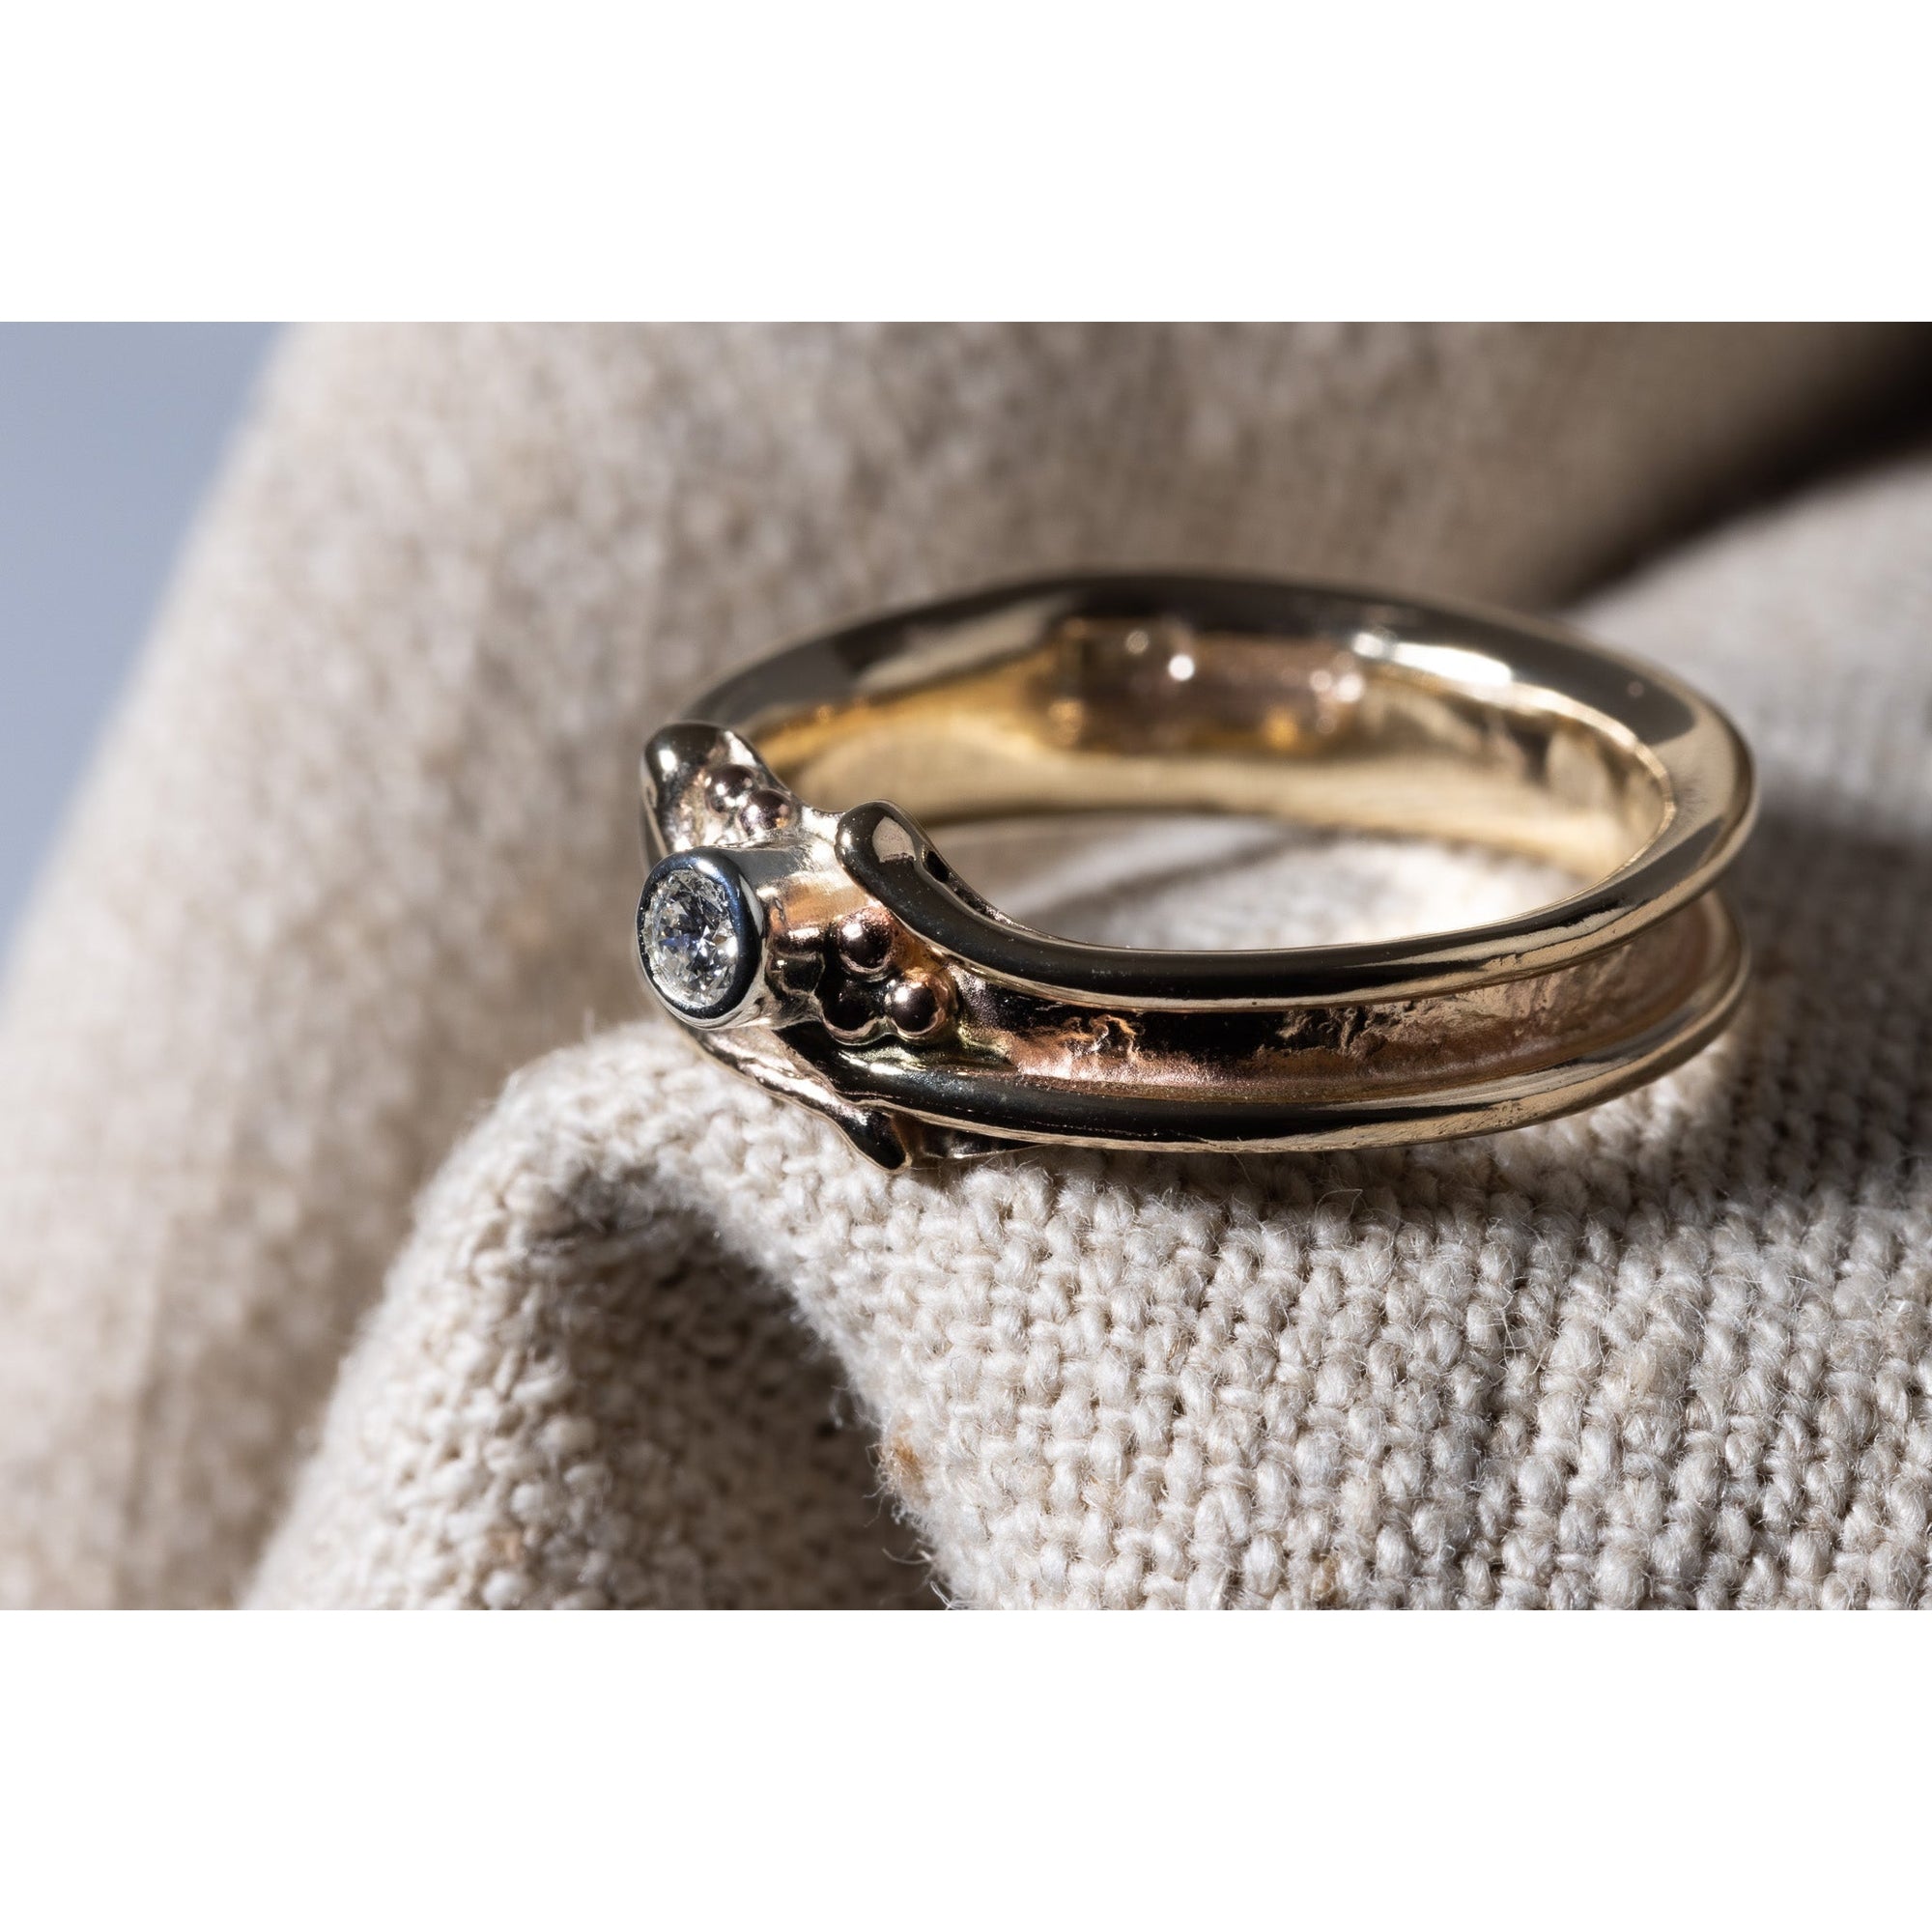 'LG23 9ct Gold & Diamond Ring' by Les Grimshaw, available at Padstow Gallery, Cornwall